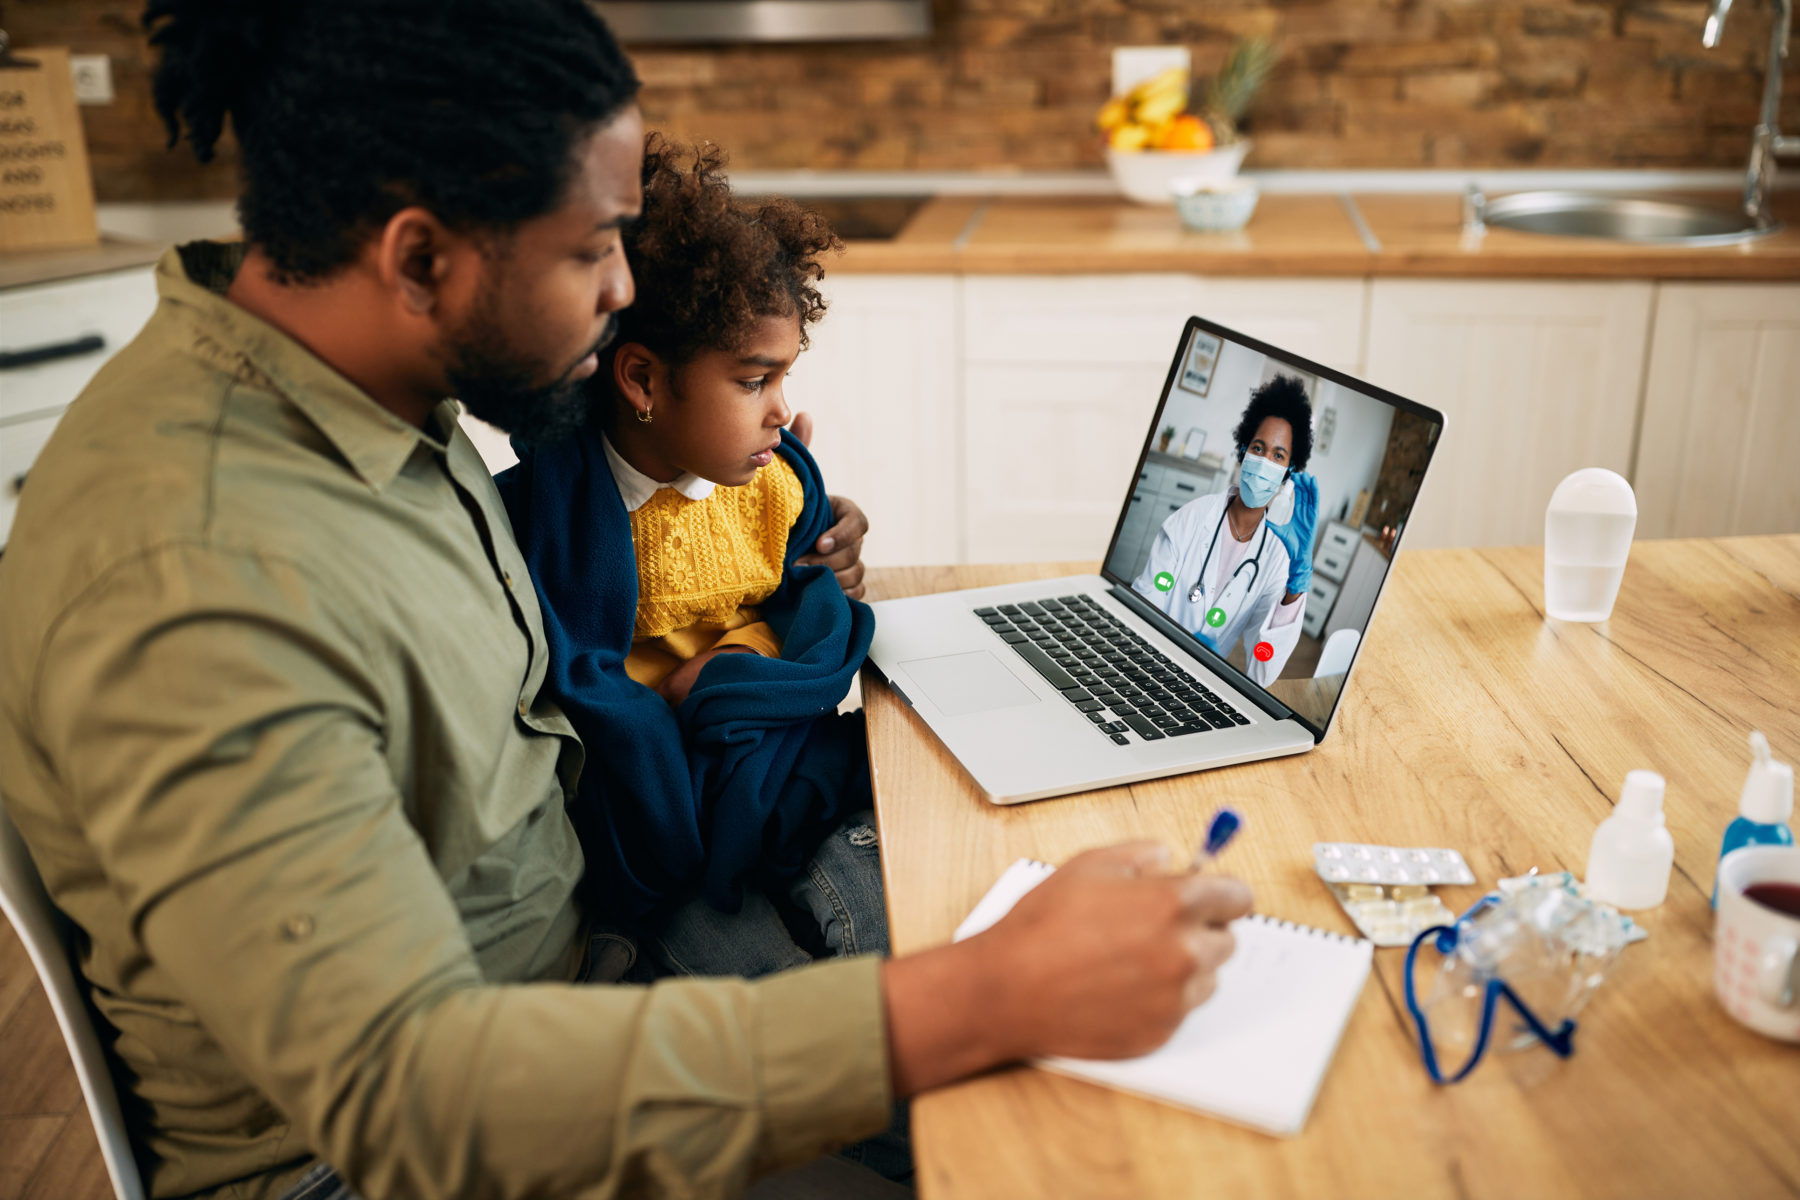 Father and daughter on telehealth call